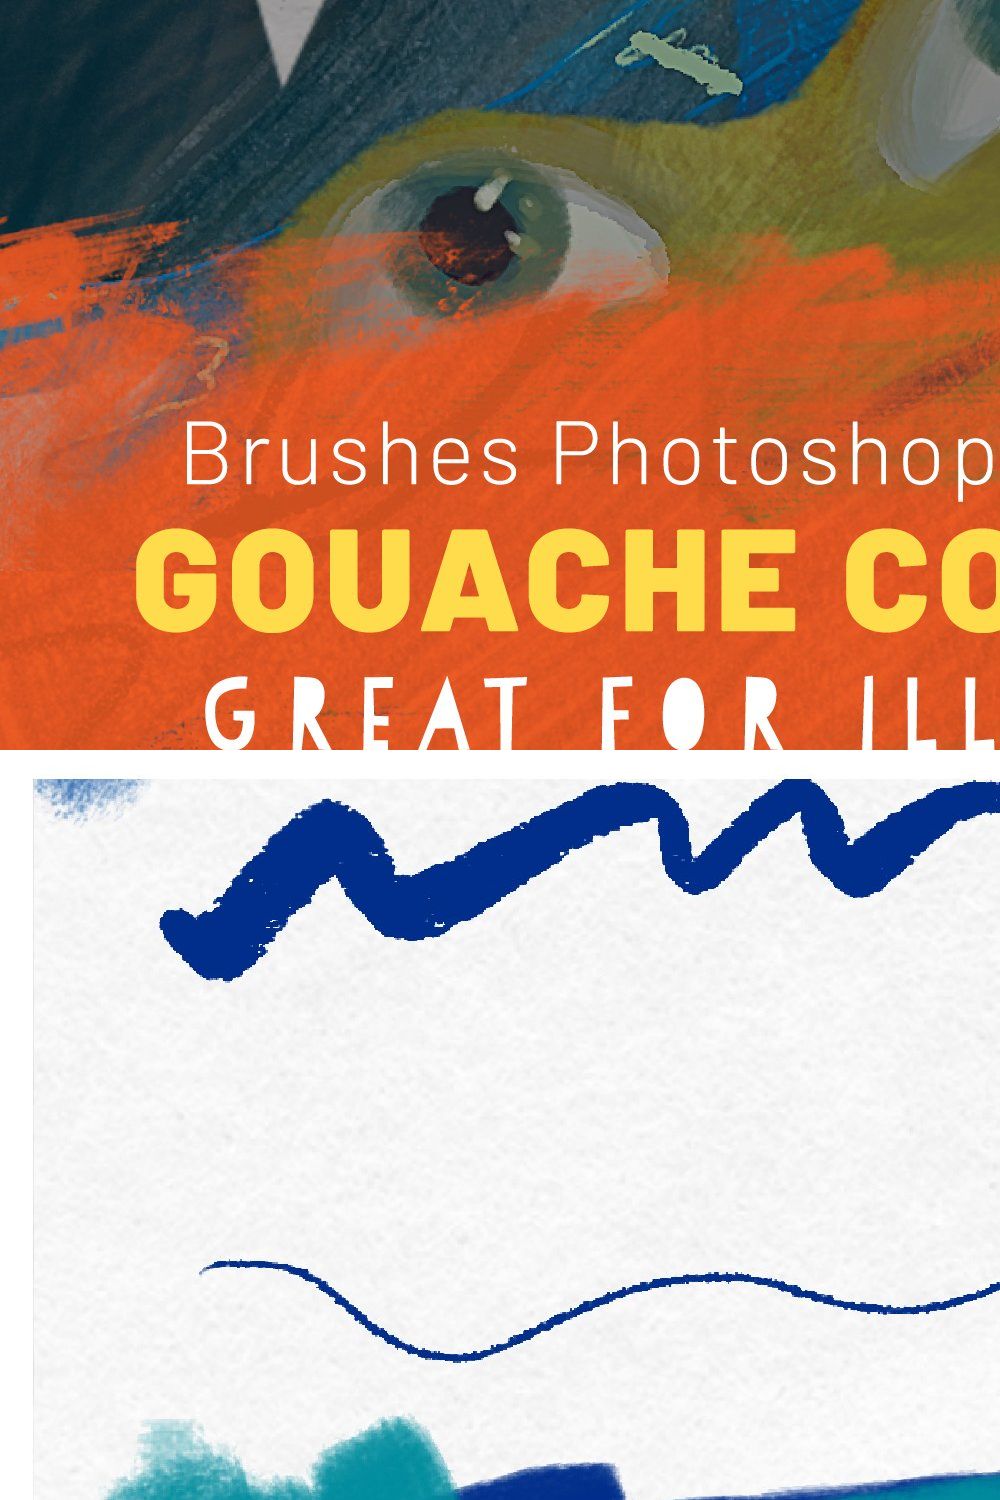 The Gouache Collection Brushes pinterest preview image.